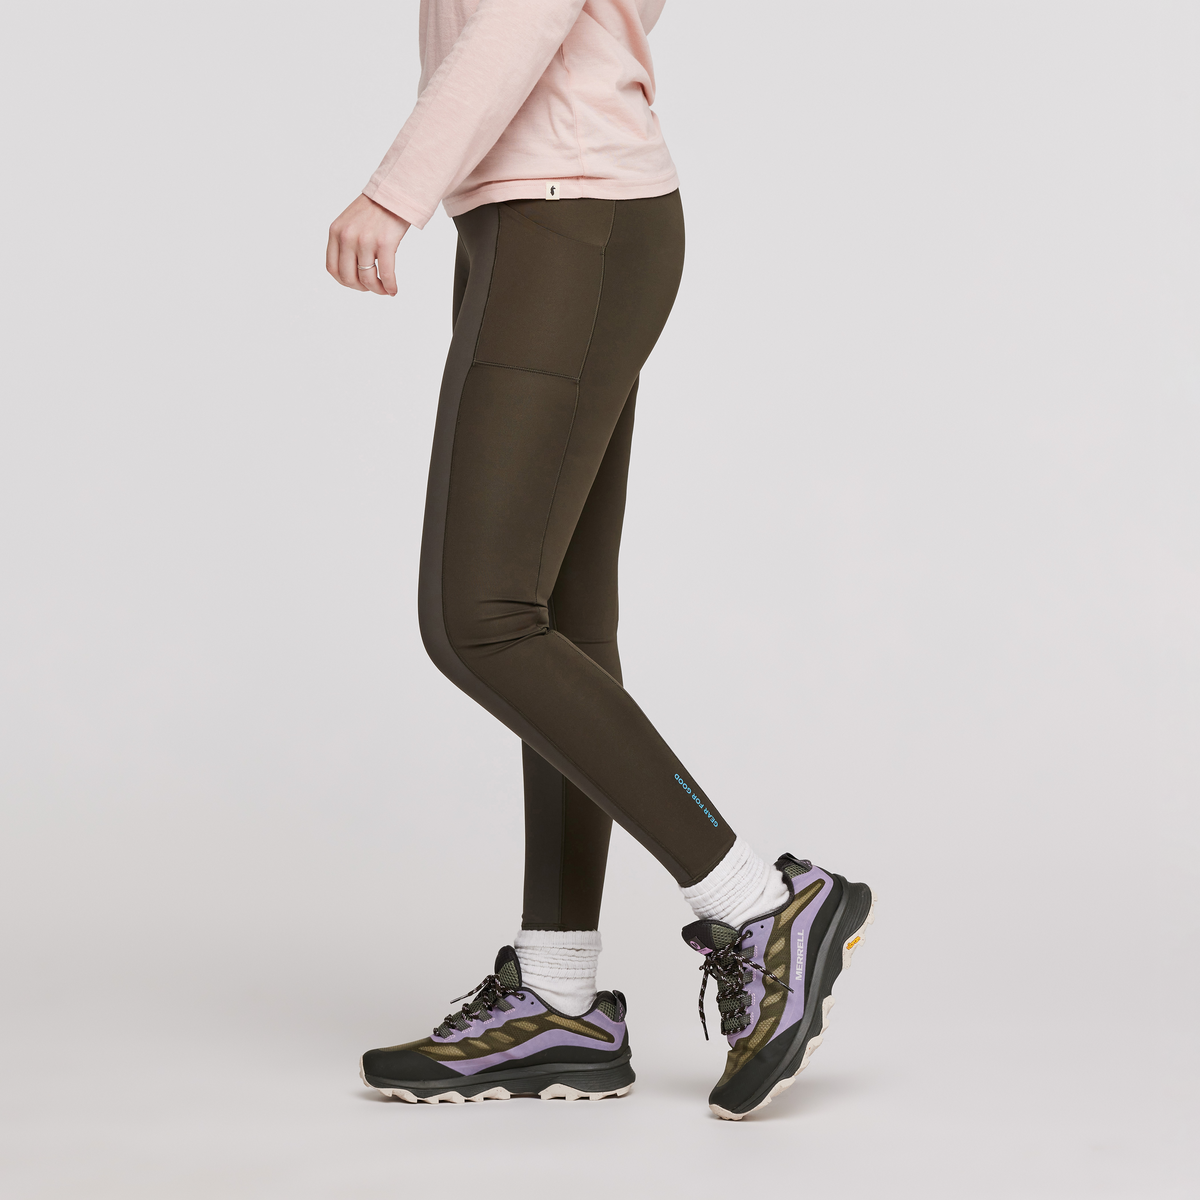 Verso Hike Tight - Women's – Cotopaxi